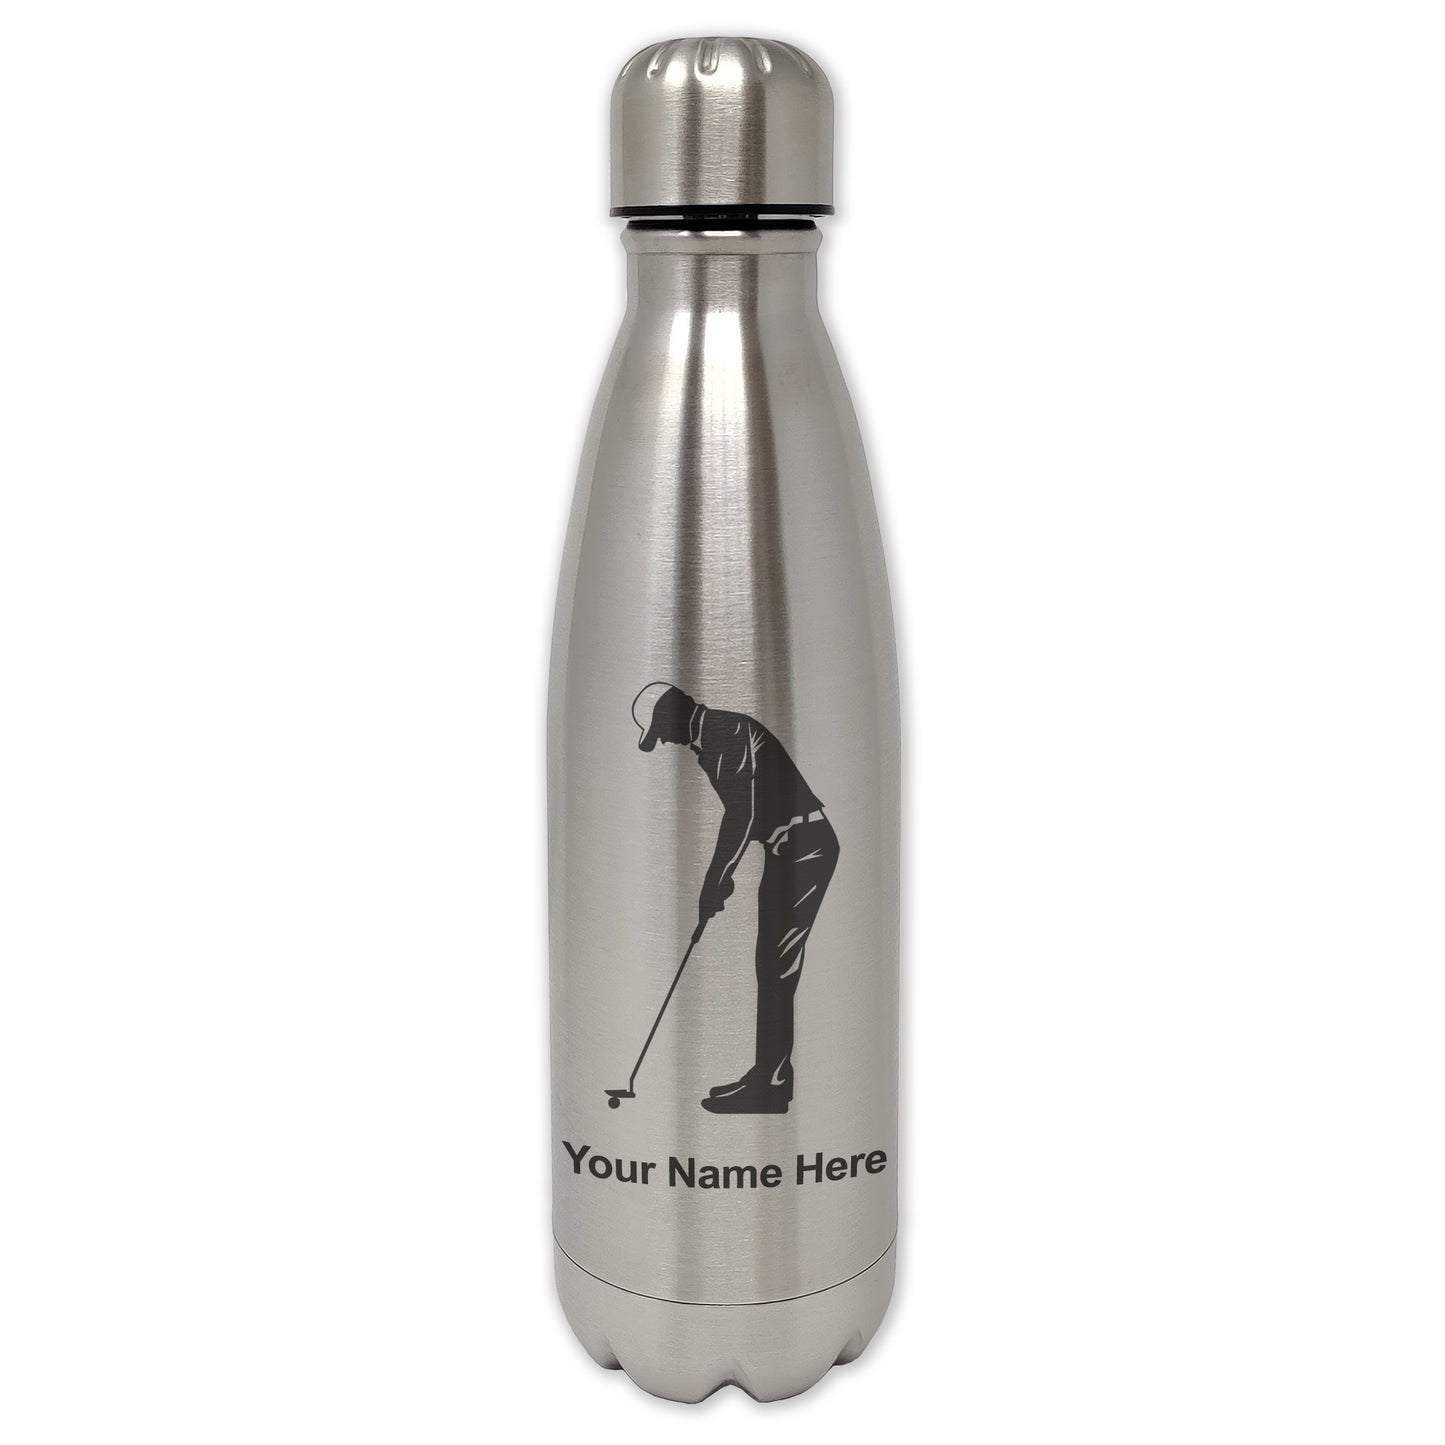 LaserGram Single Wall Water Bottle, Golfer Putting, Personalized Engraving Included